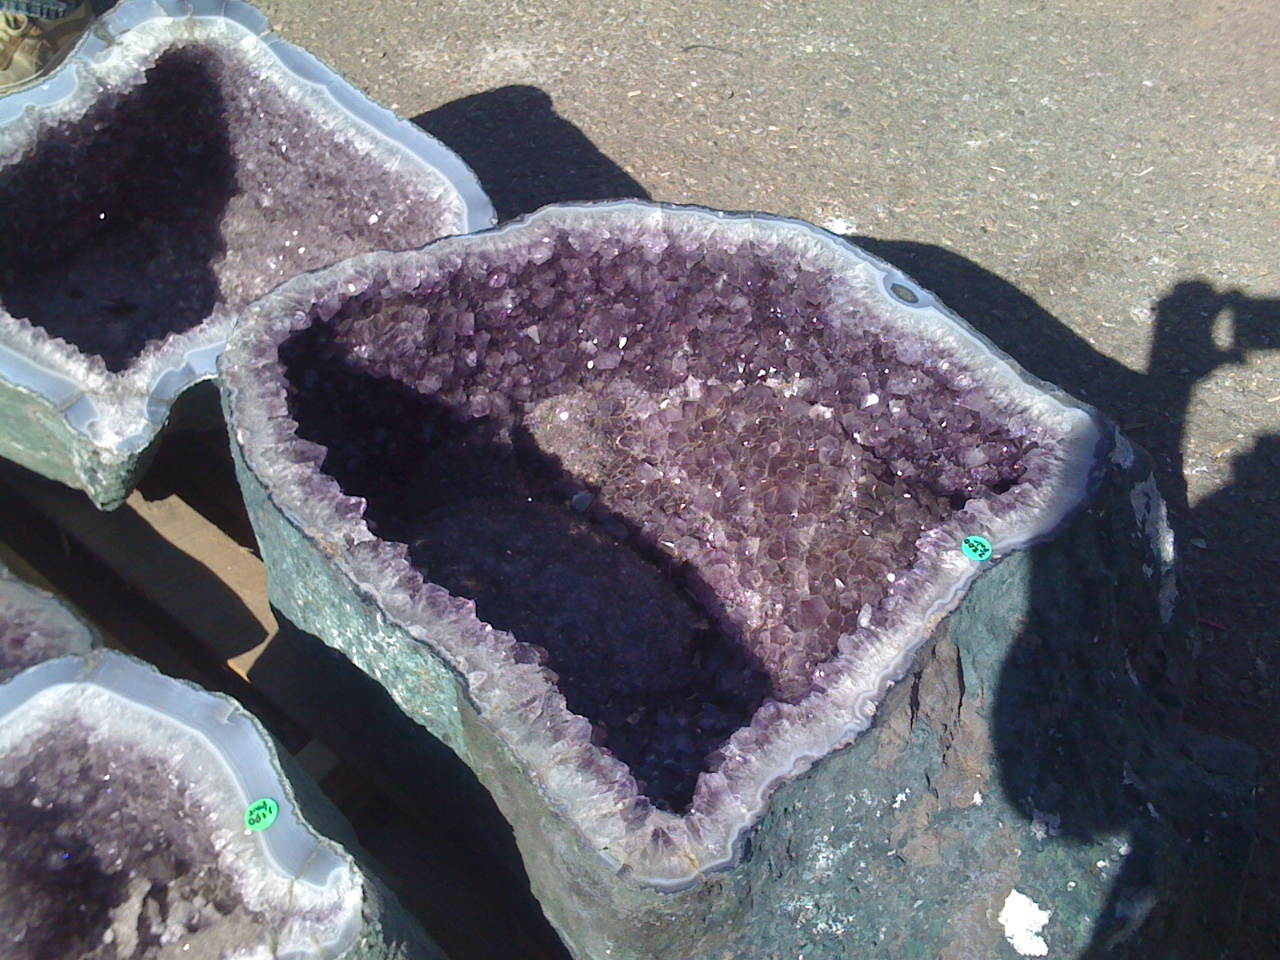 Amethyst at Tucson Gem and Mineral Show